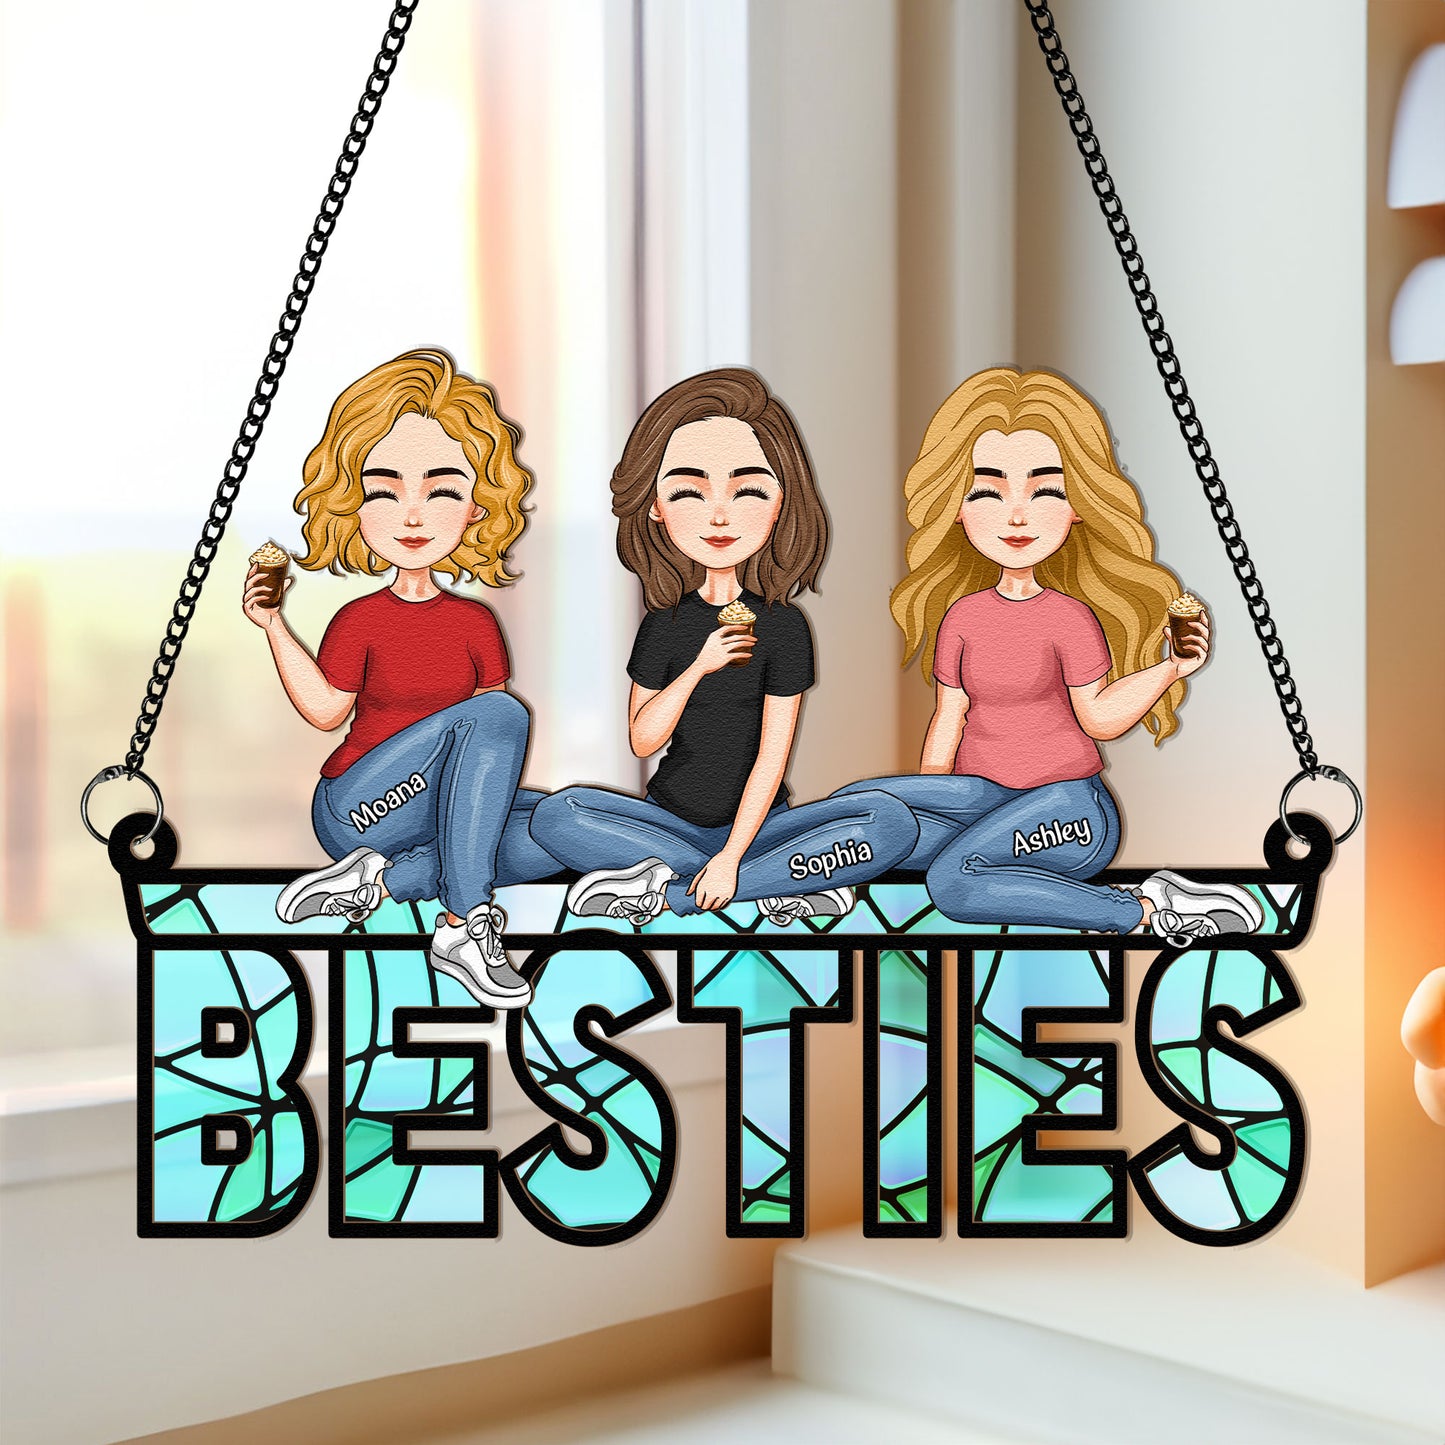 Besties Sitting Together - Personalized Window Hanging Suncatcher Ornament